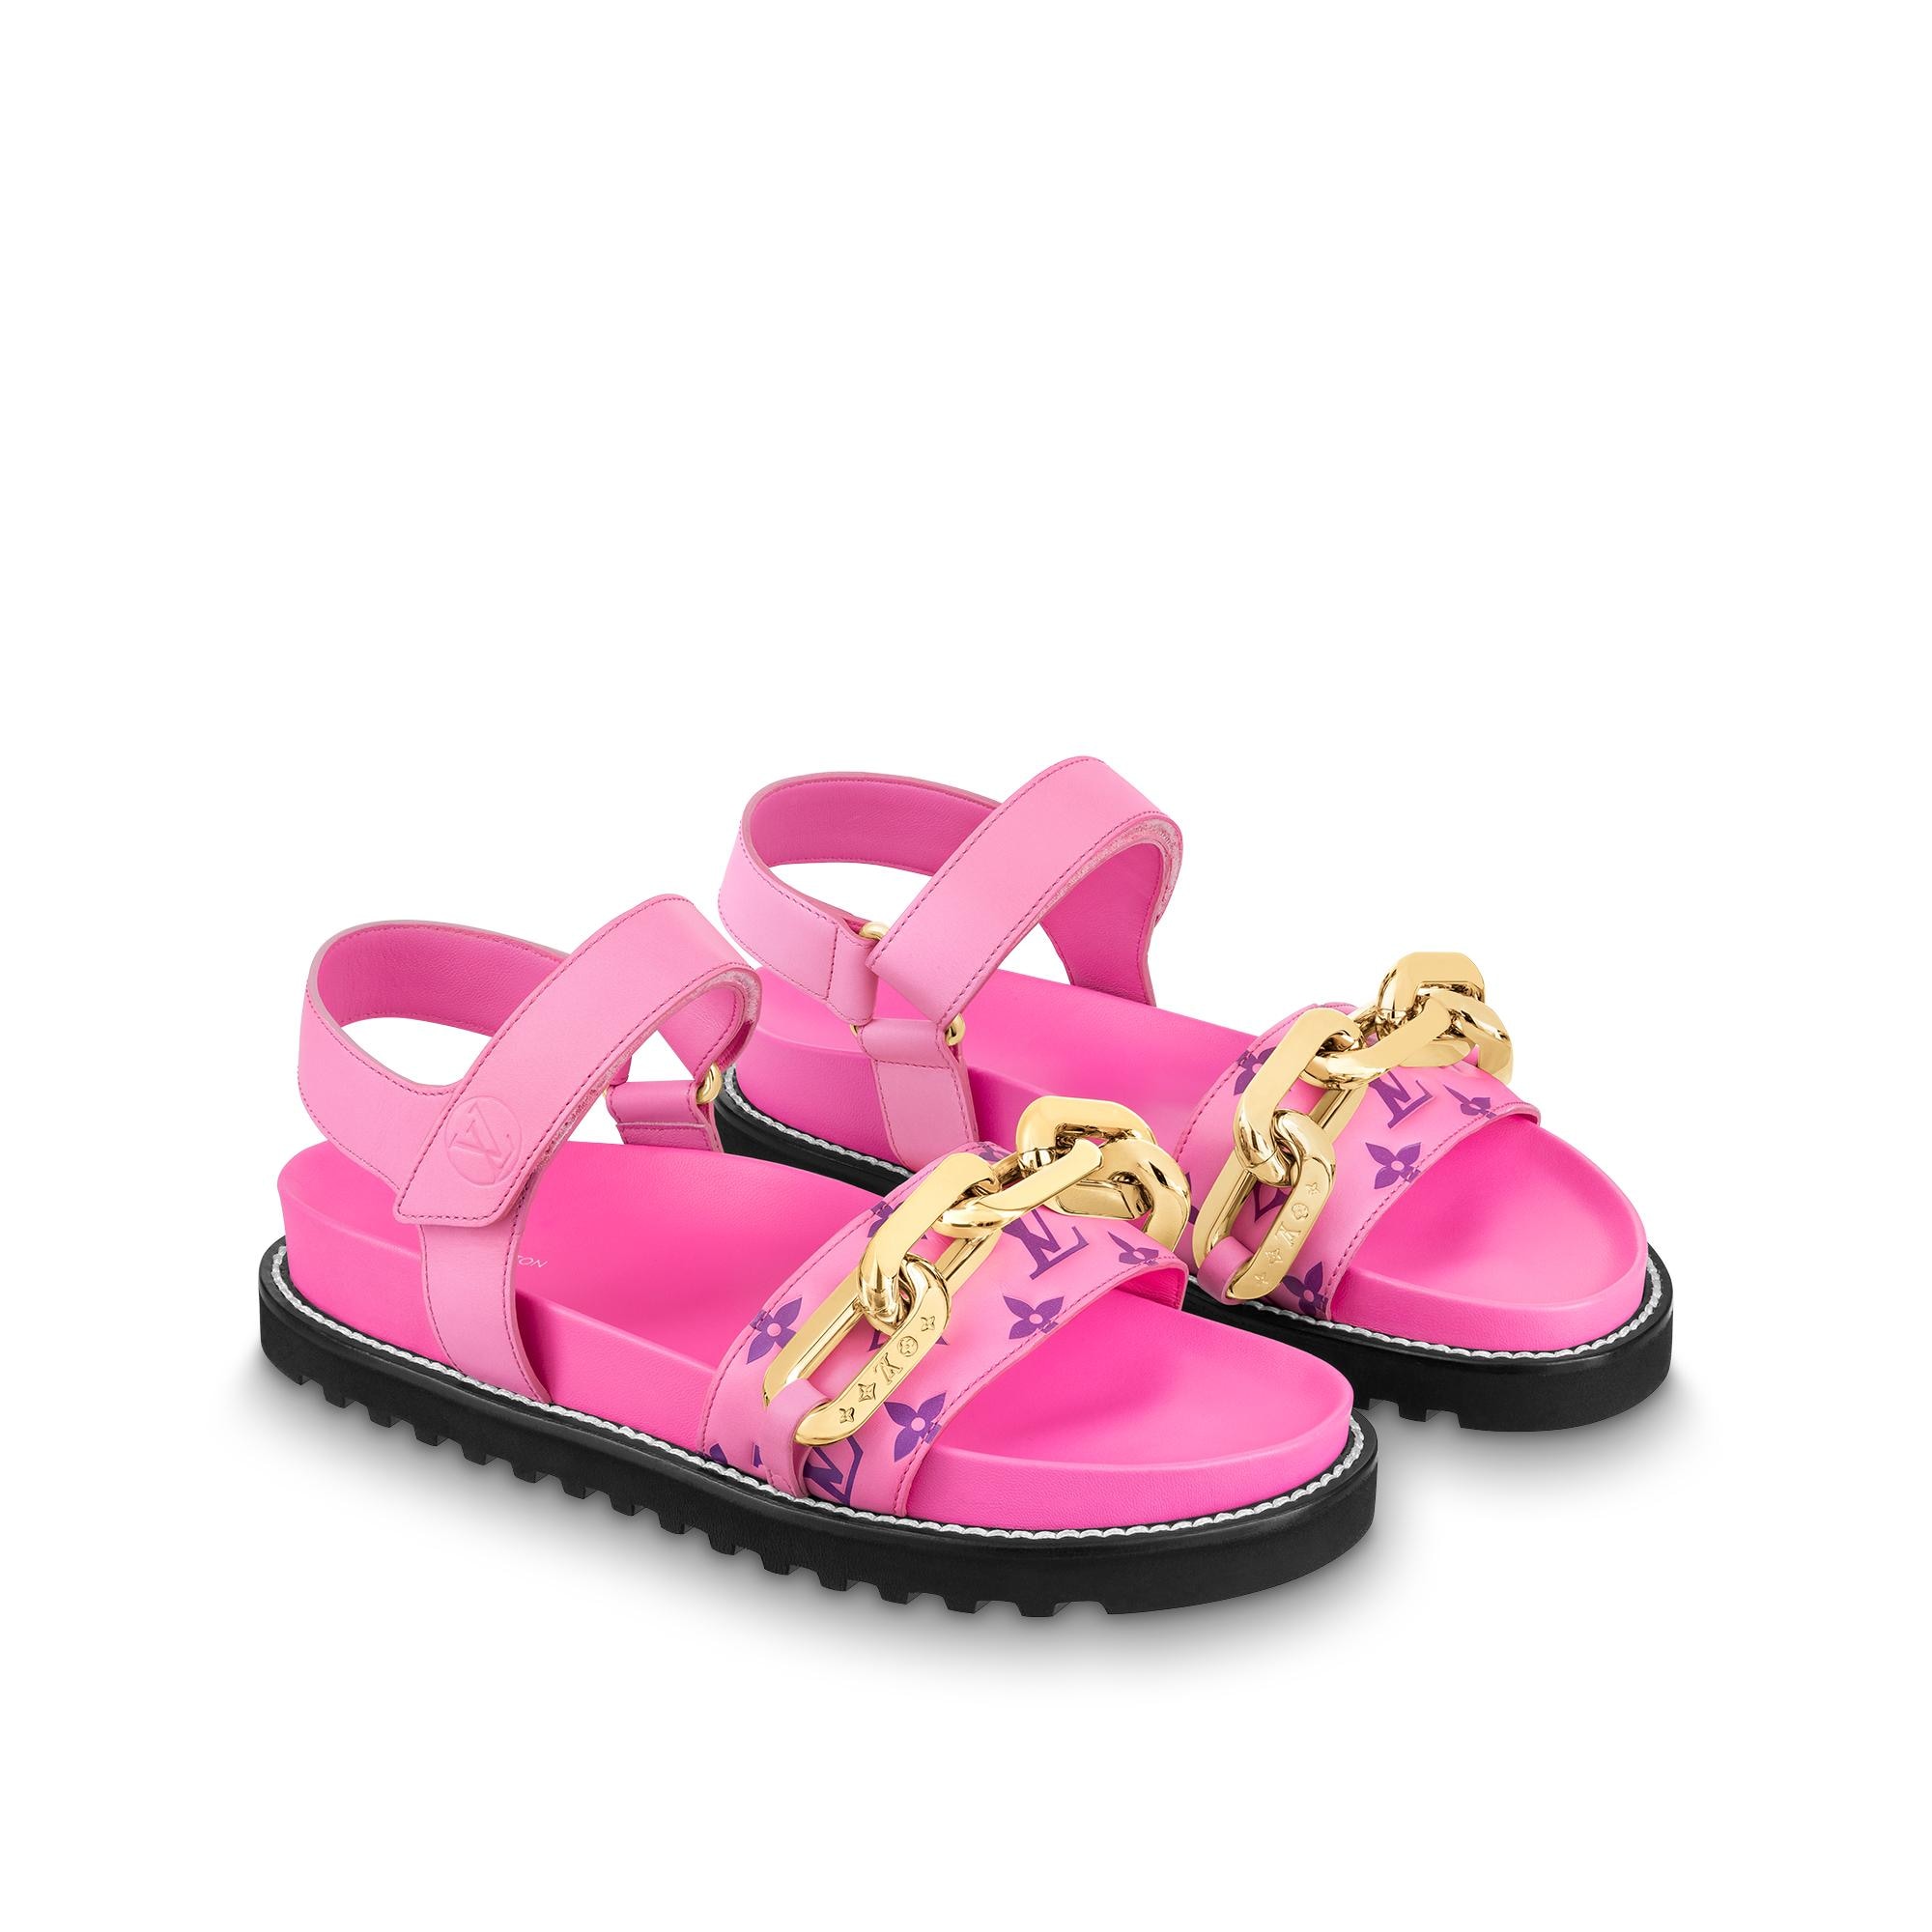 Louis Vuitton Paseo Flat Comfort Sandal in Rose - Shoes 1A90PY - $163.80 